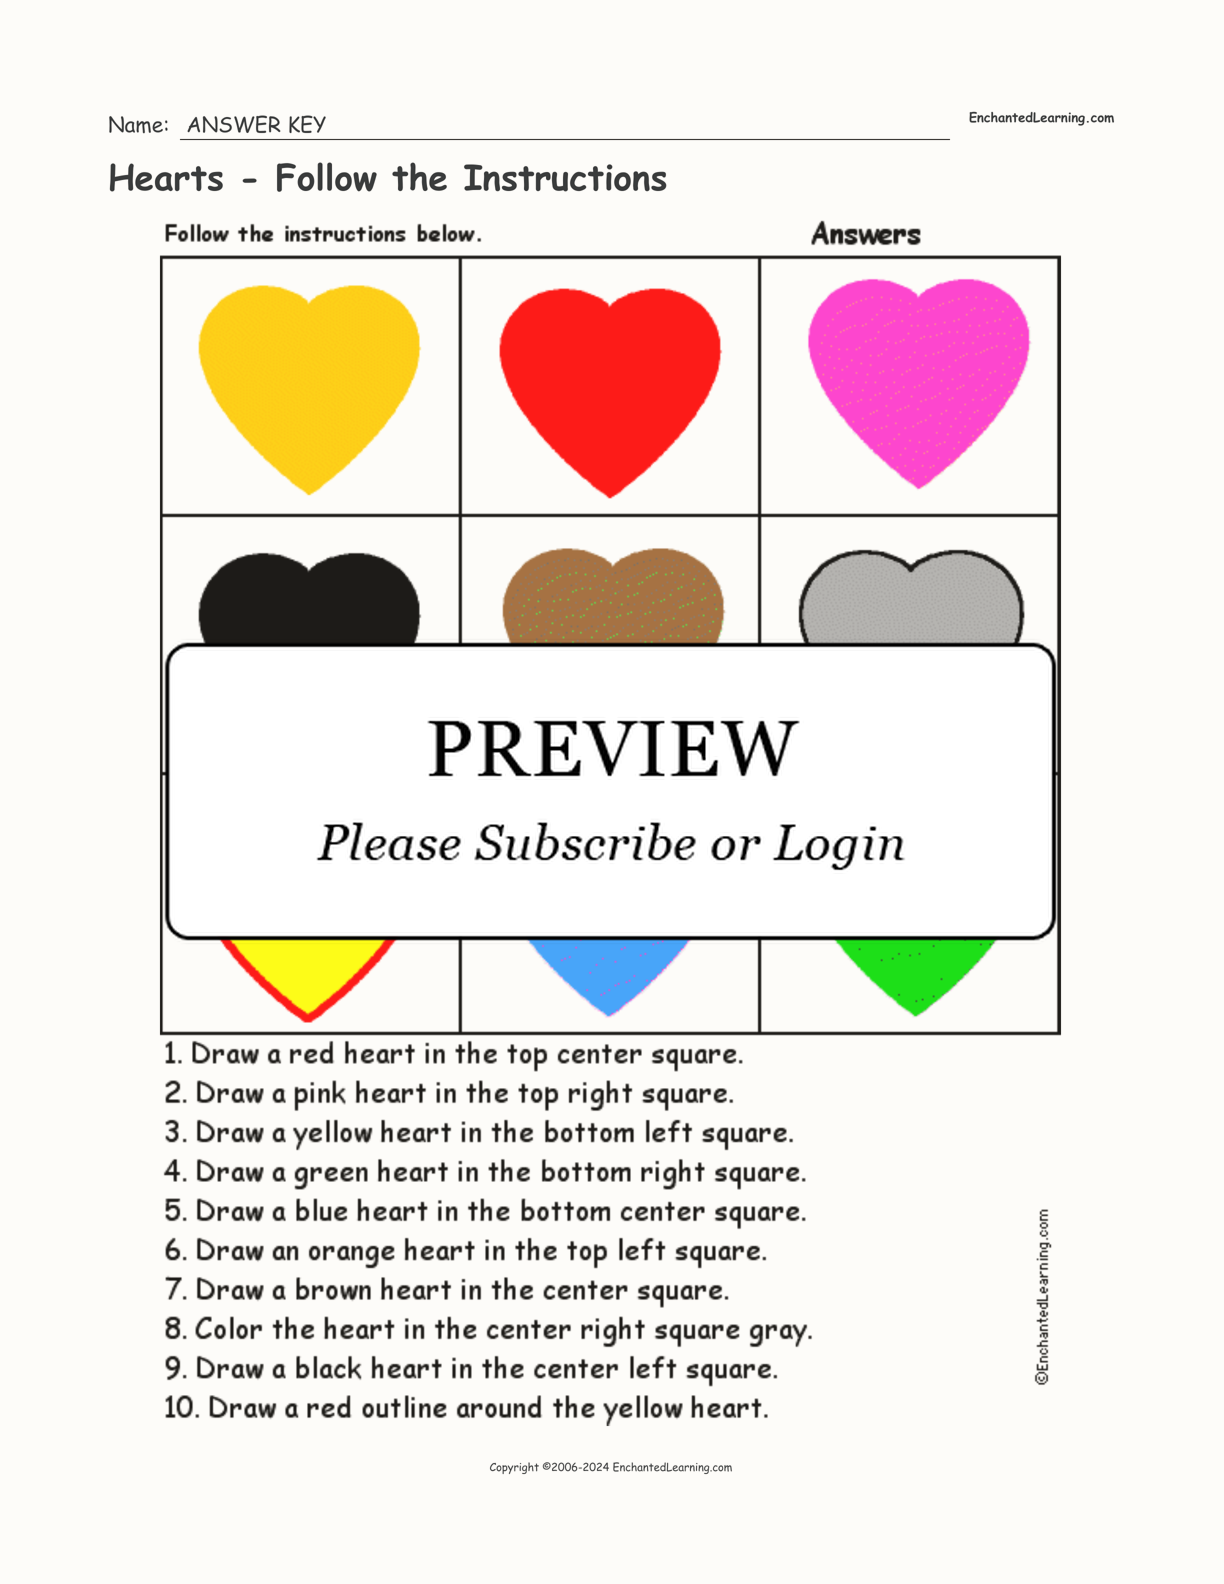 Hearts - Follow the Instructions interactive worksheet page 2